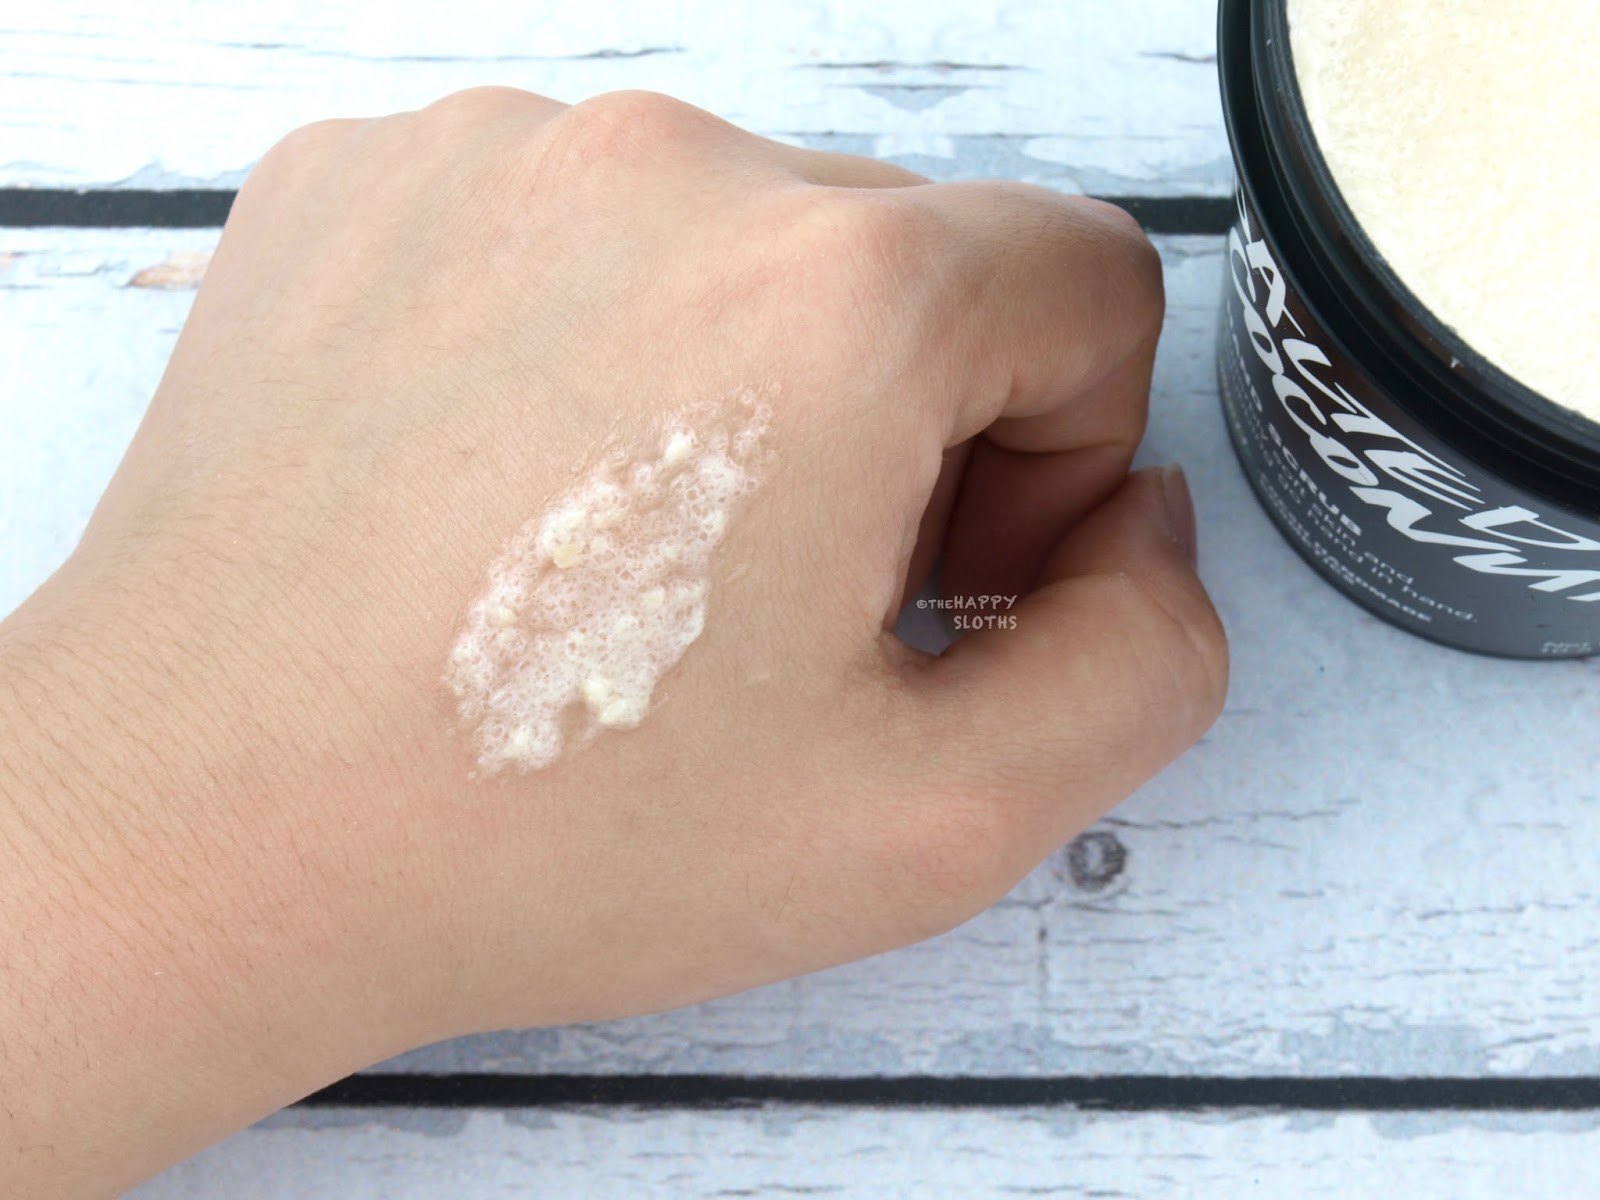 Lush Salted Coconut Hand Scrub: Review